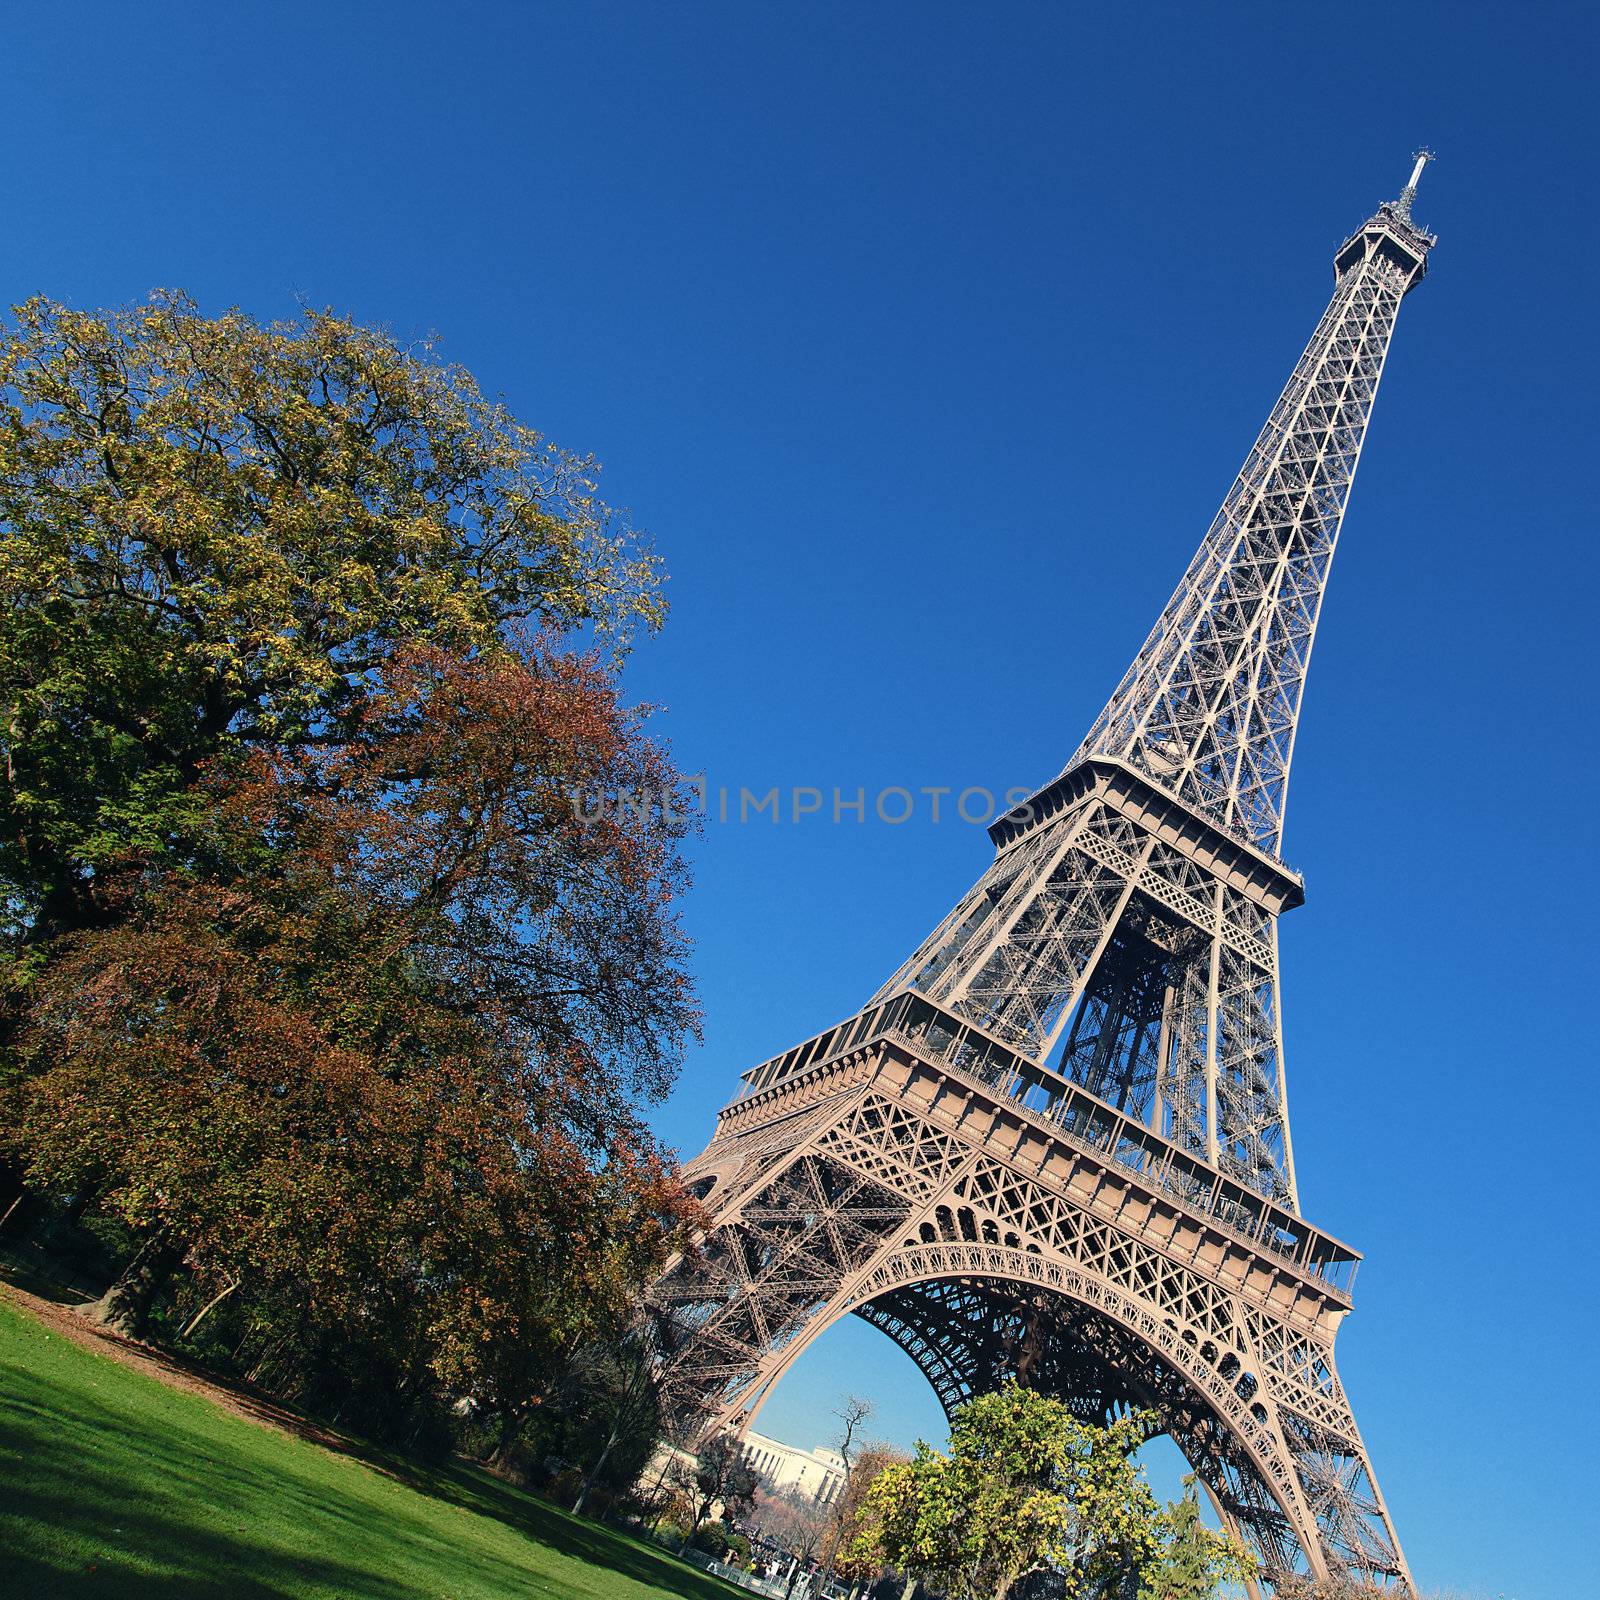 Eiffel Tower and trees in Paris in autumn